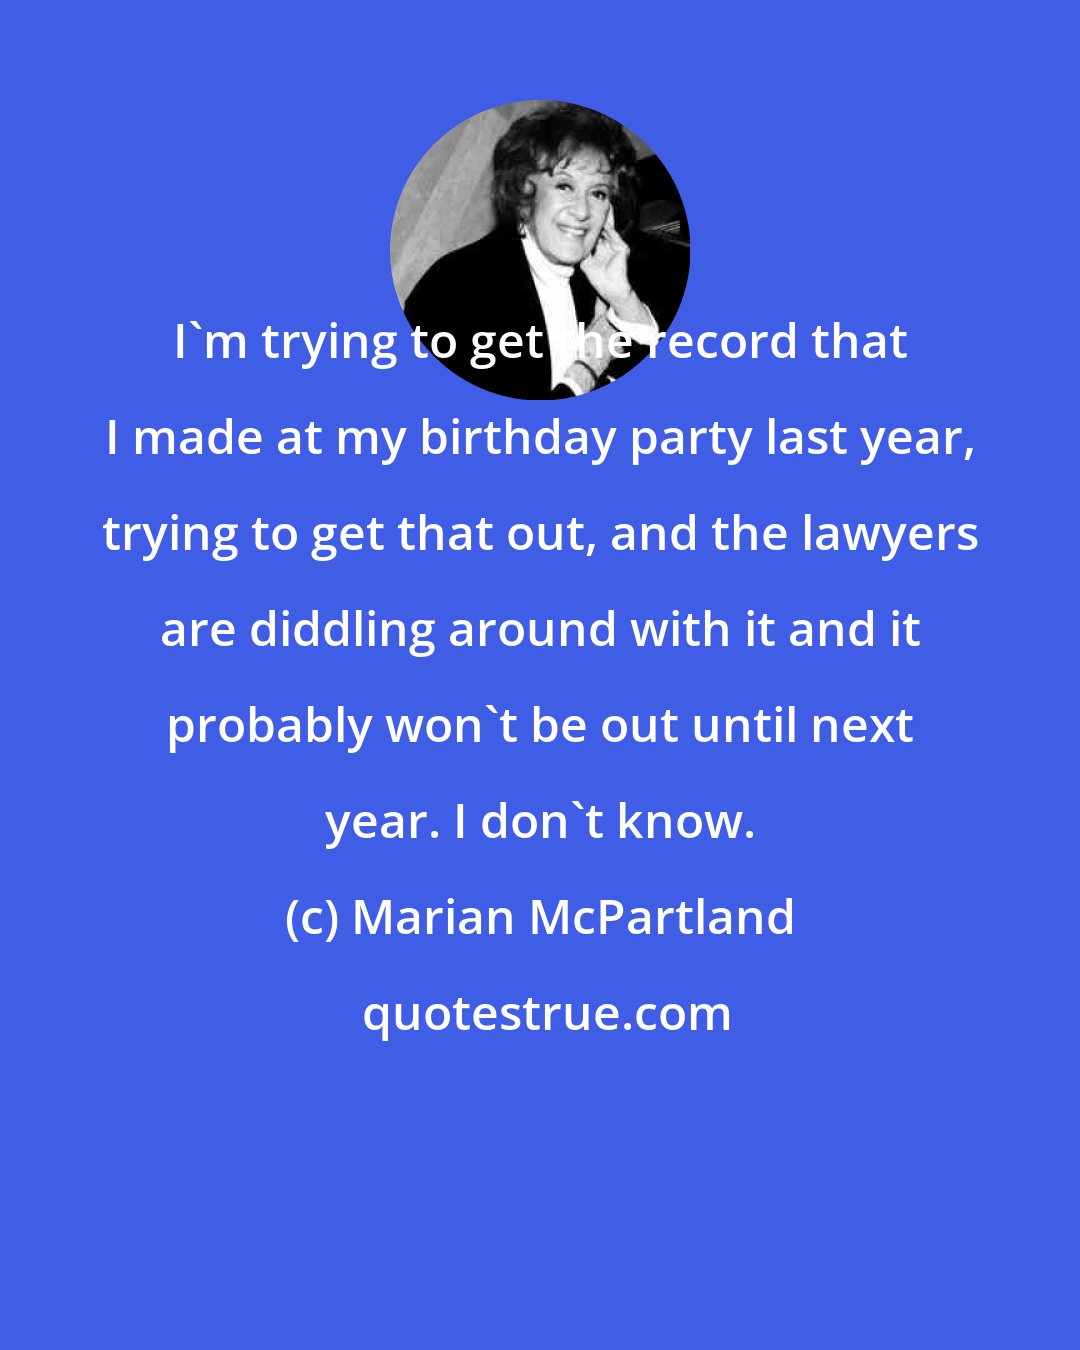 Marian McPartland: I'm trying to get the record that I made at my birthday party last year, trying to get that out, and the lawyers are diddling around with it and it probably won't be out until next year. I don't know.